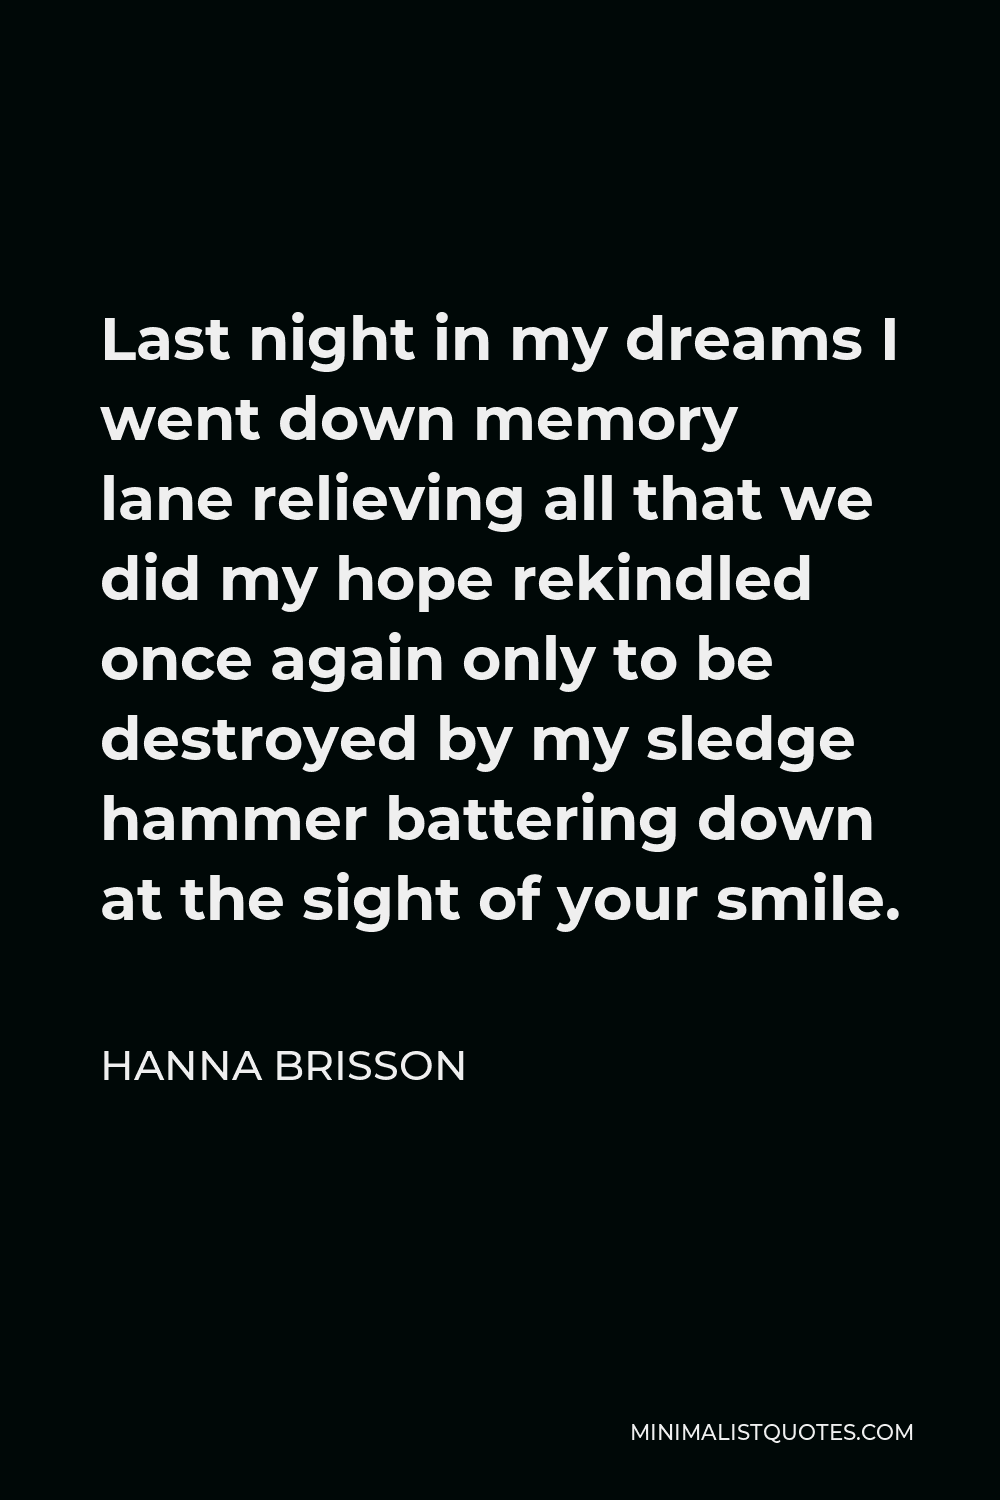 Hanna Brisson Quote - Last night in my dreams I went down memory lane relieving all that we did my hope rekindled once again only to be destroyed by my sledge hammer battering down at the sight of your smile.